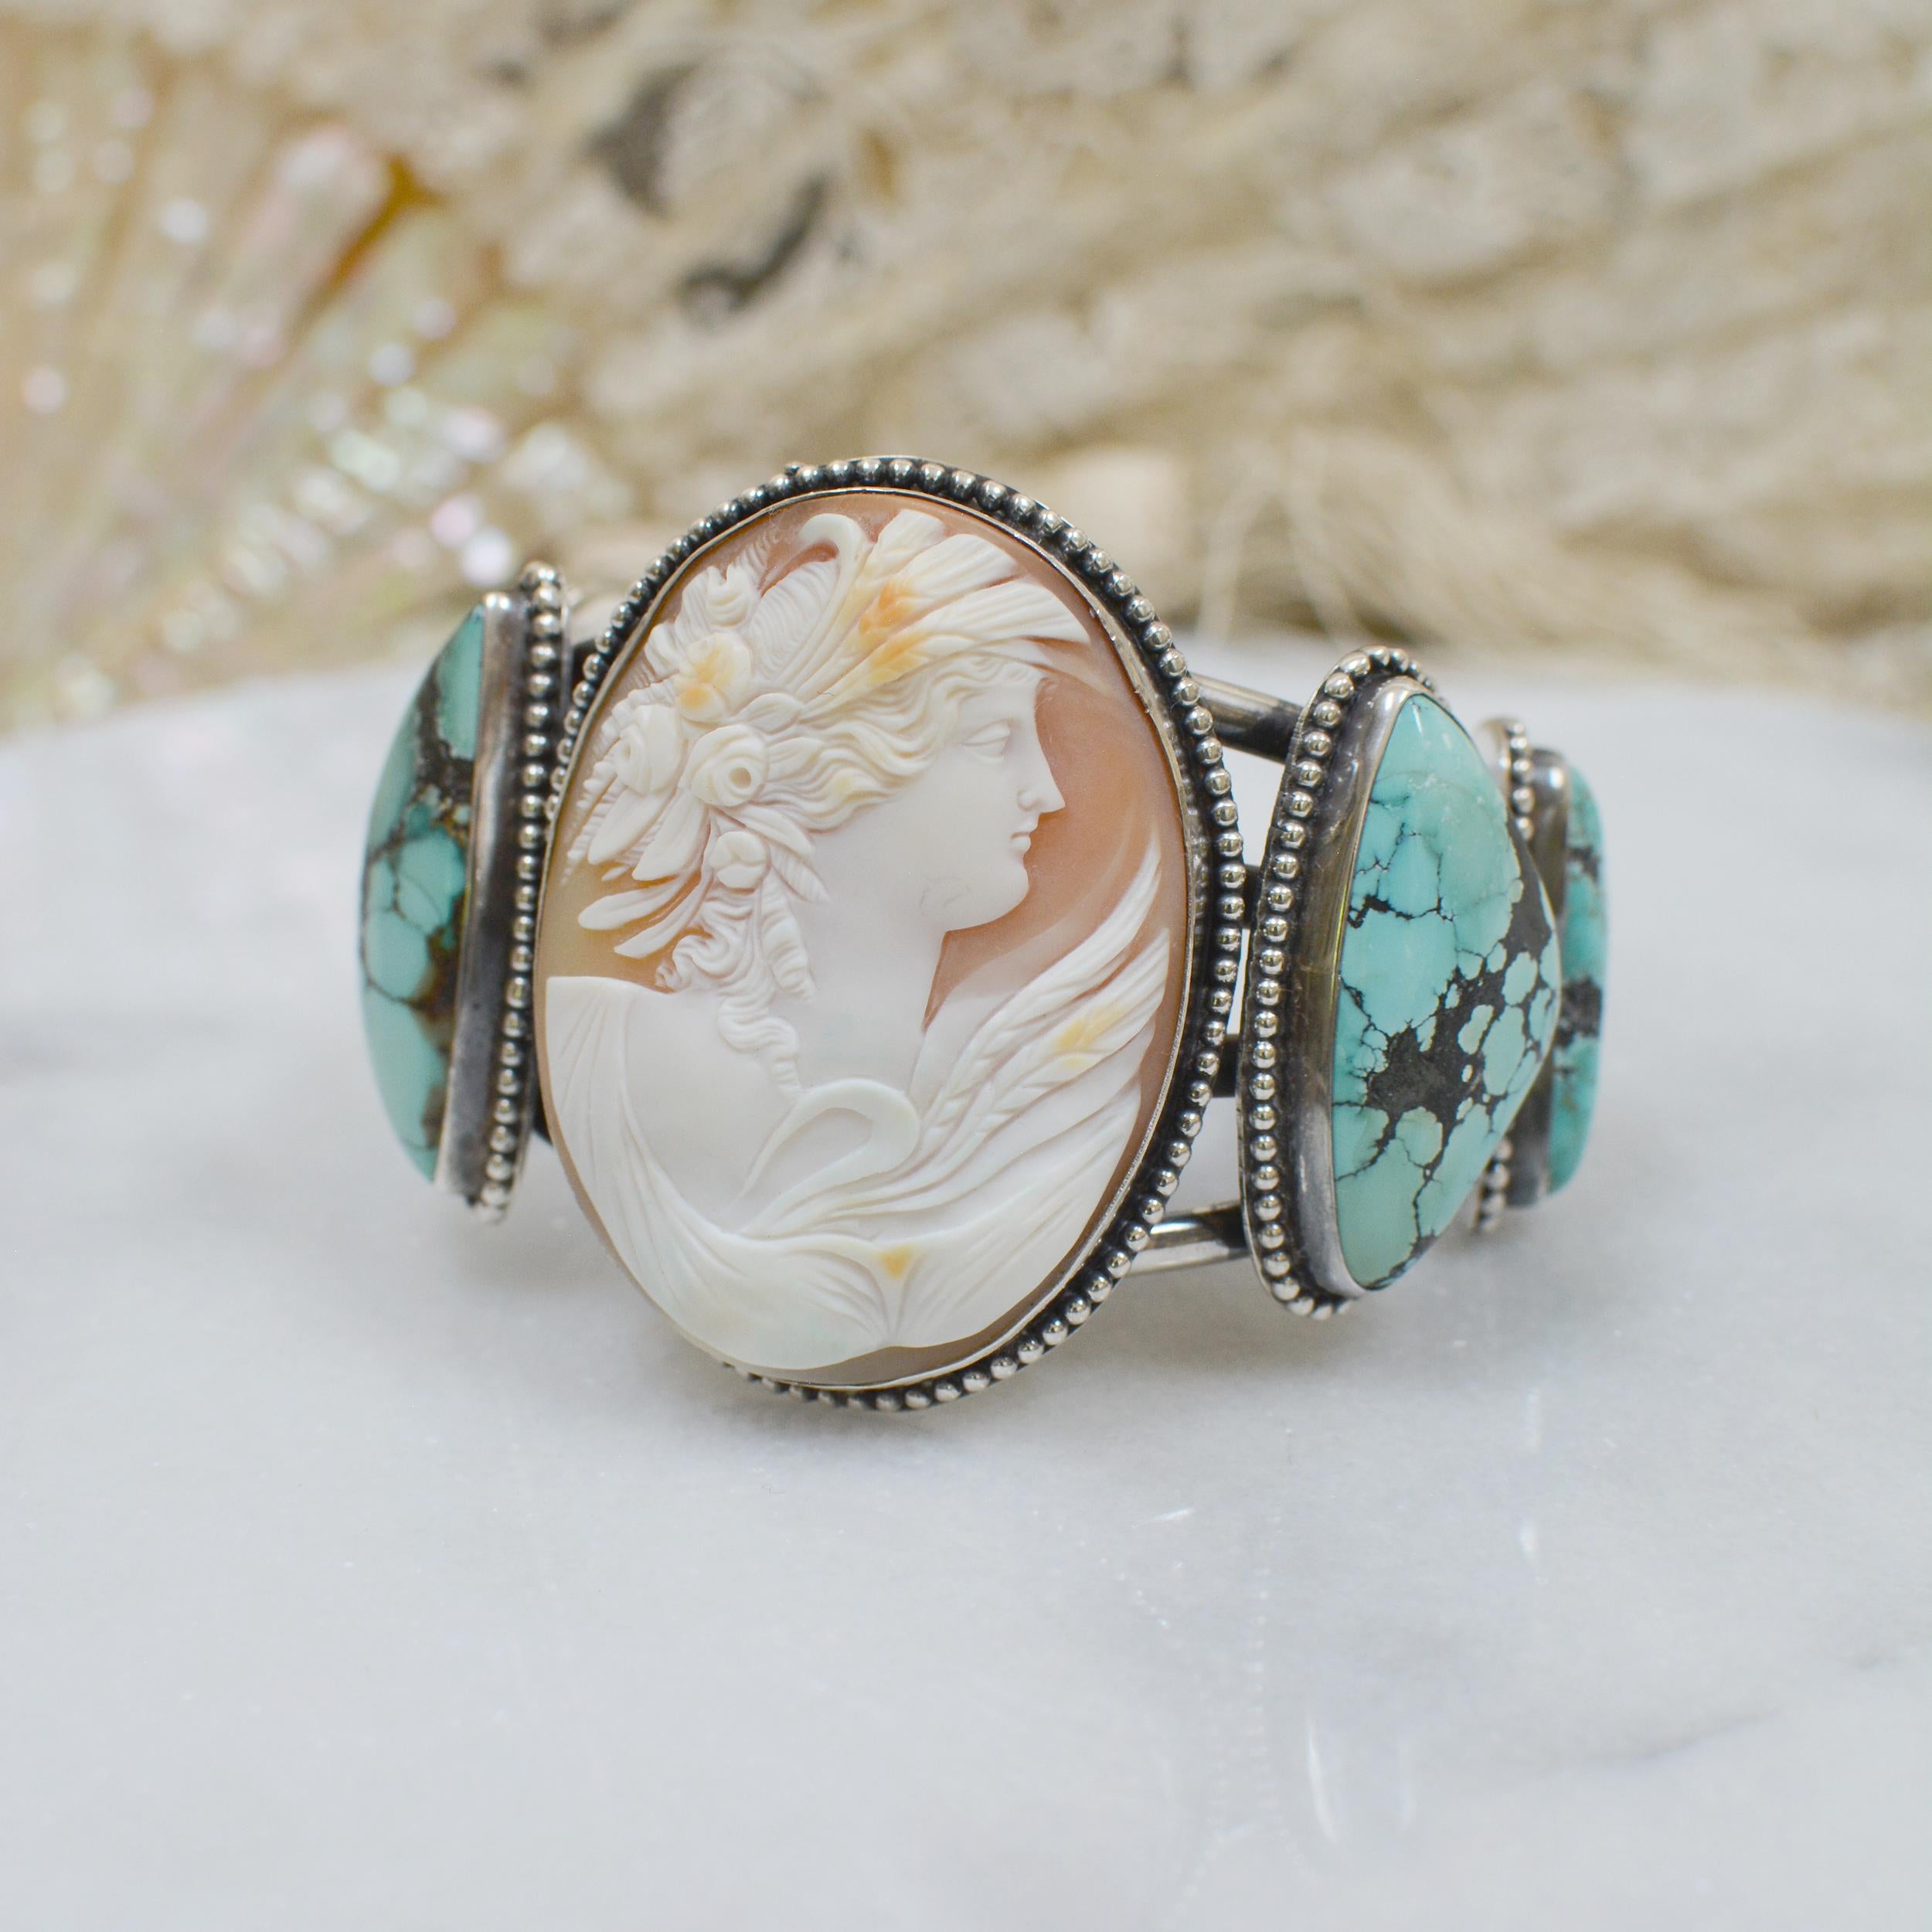 This sterling silver cuff bracelet features a very fine, hand carved nineteenth century cameo depicting the Greek goddess Leda, who was the queen of Sparta, as well as the mother of Helen of Troy, who incited the Trojan War. Upon Leda's chest is the